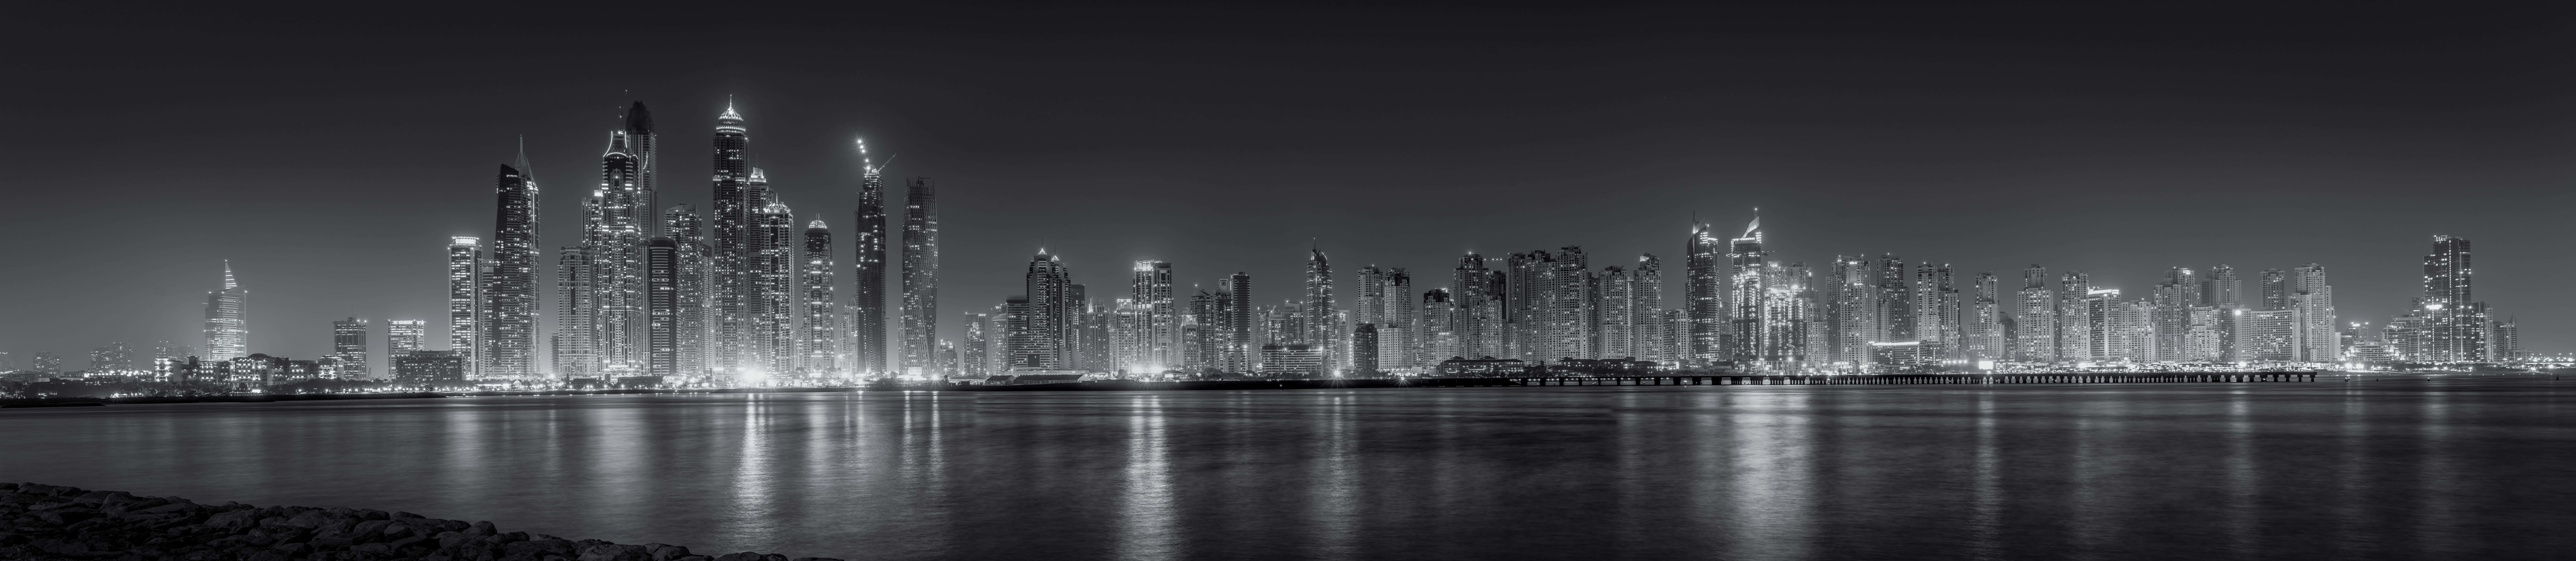 "Standing still in the middle of a bustling Black&White City" Wallpaper